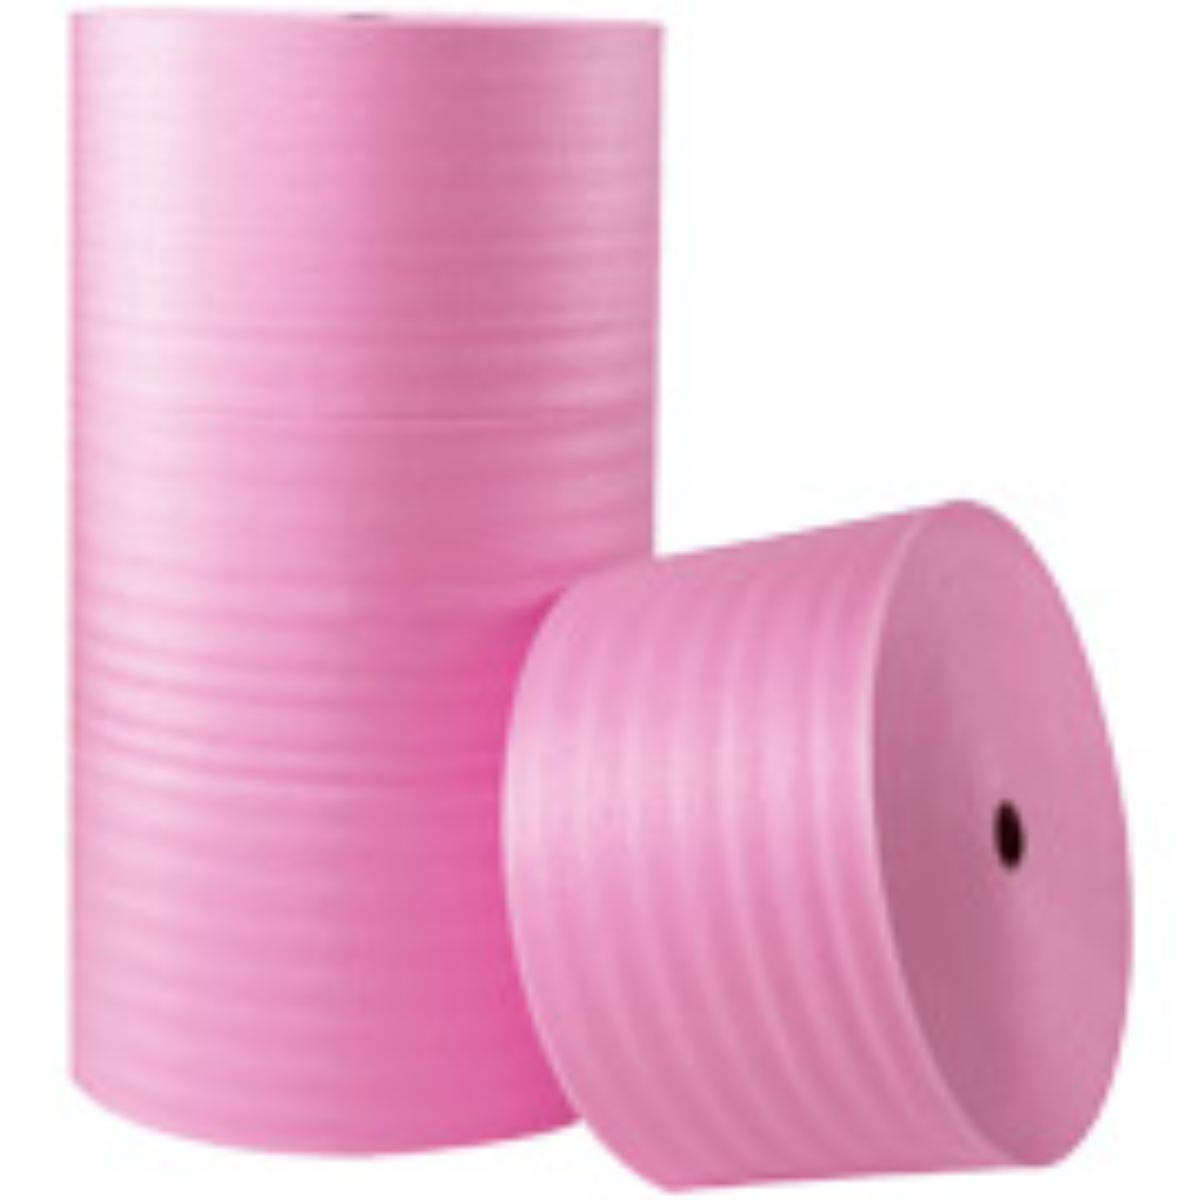 1/8″ x 6″ x 550′ NON Perforated Anti-Static Air Foam Rolls Packed 6 per Bundle